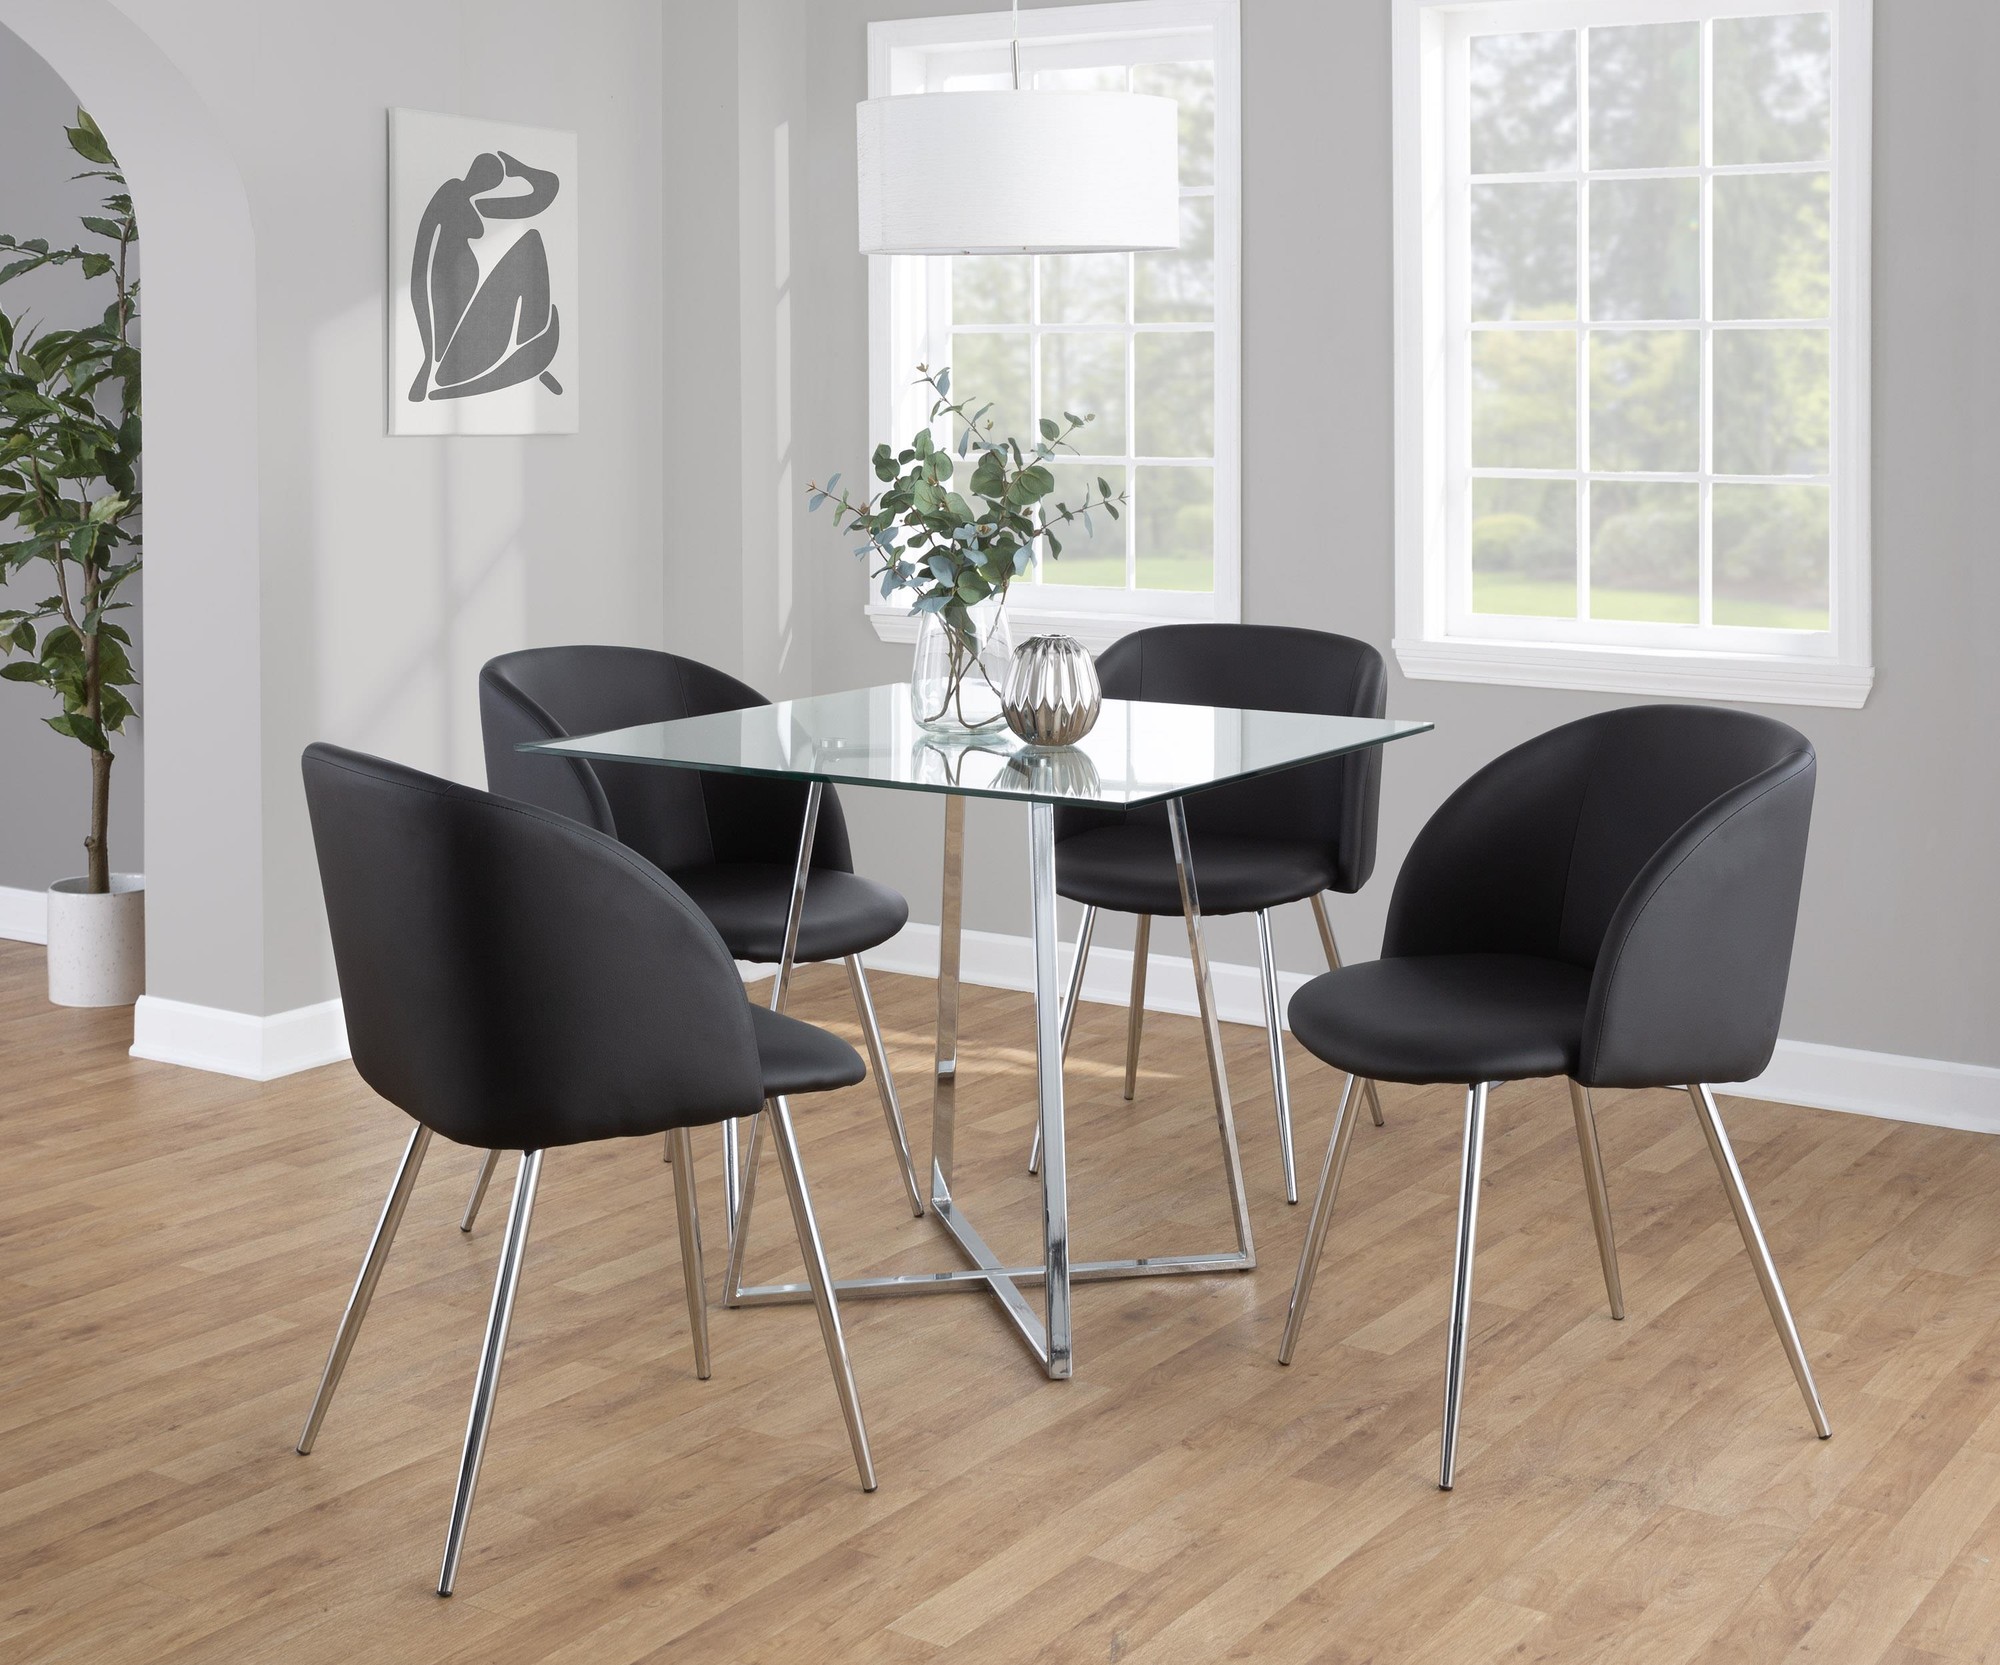 Cosmo Square Dining Table